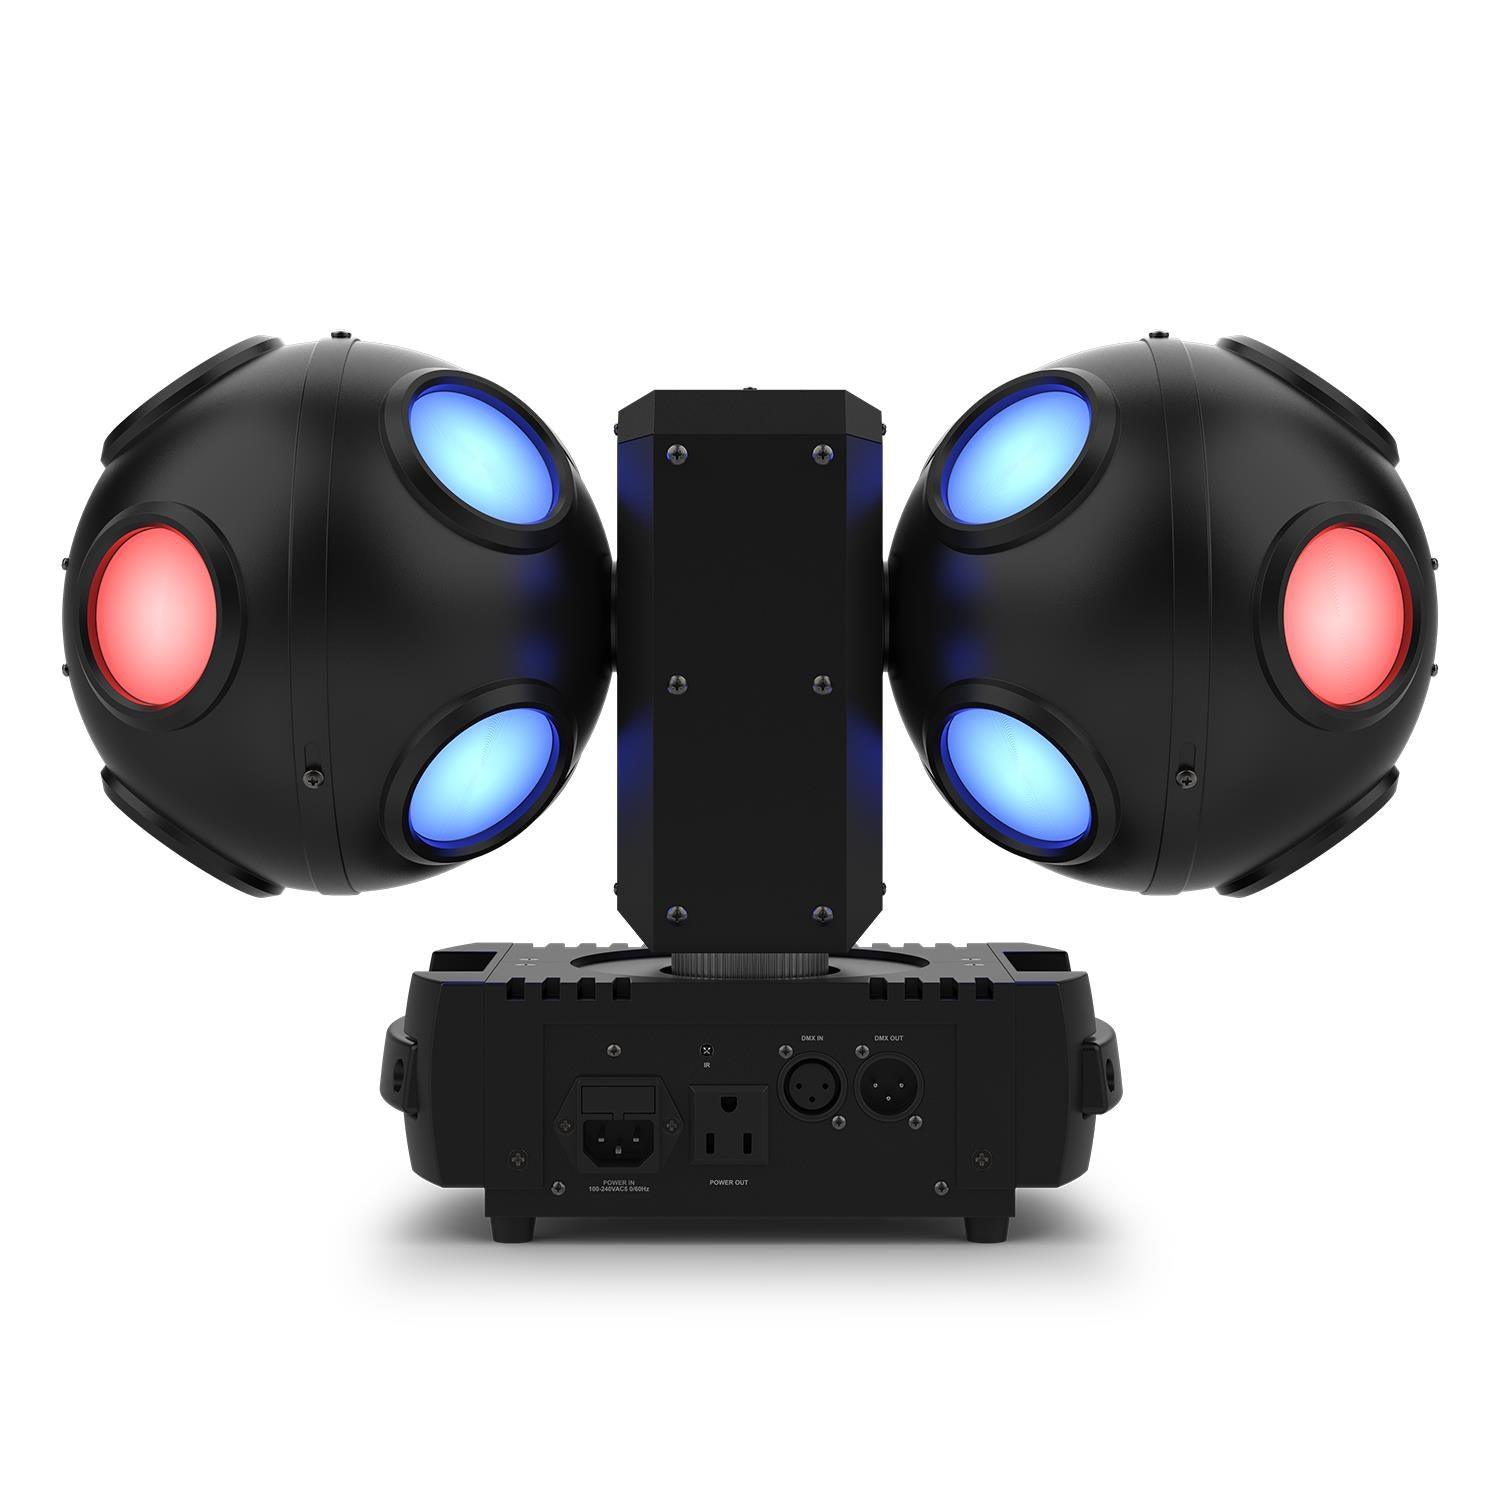 2 x Chauvet DJ Cosmos HP RGBW Rotating Effect Light with Carry Bags, Cable & Remote - DY Pro Audio